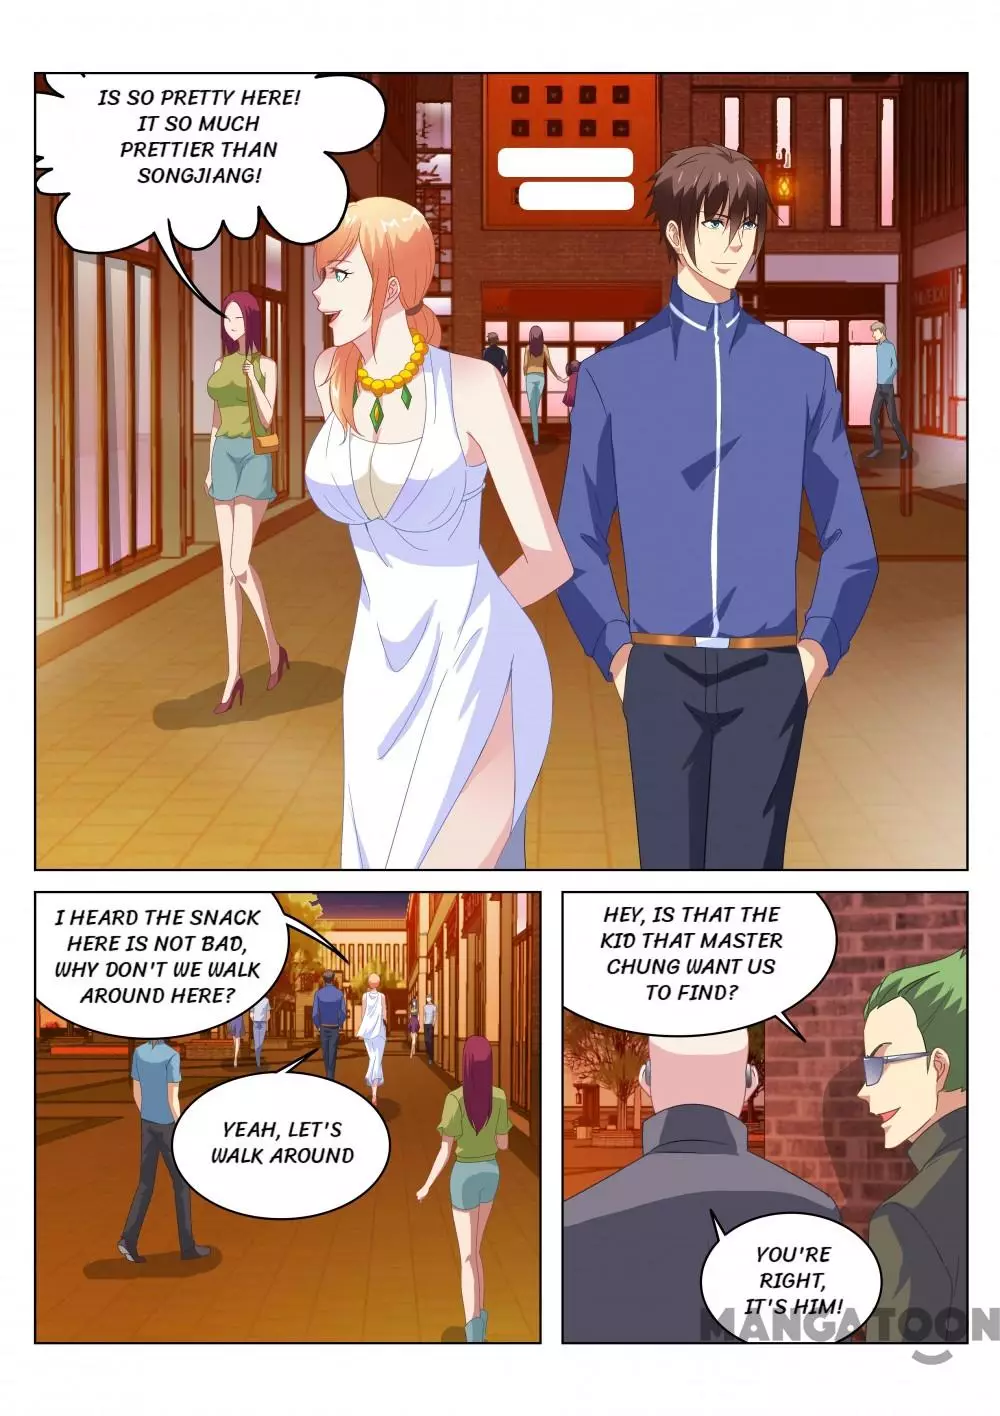 So Pure, So Flirtatious ( Very Pure ) - 142 page 1